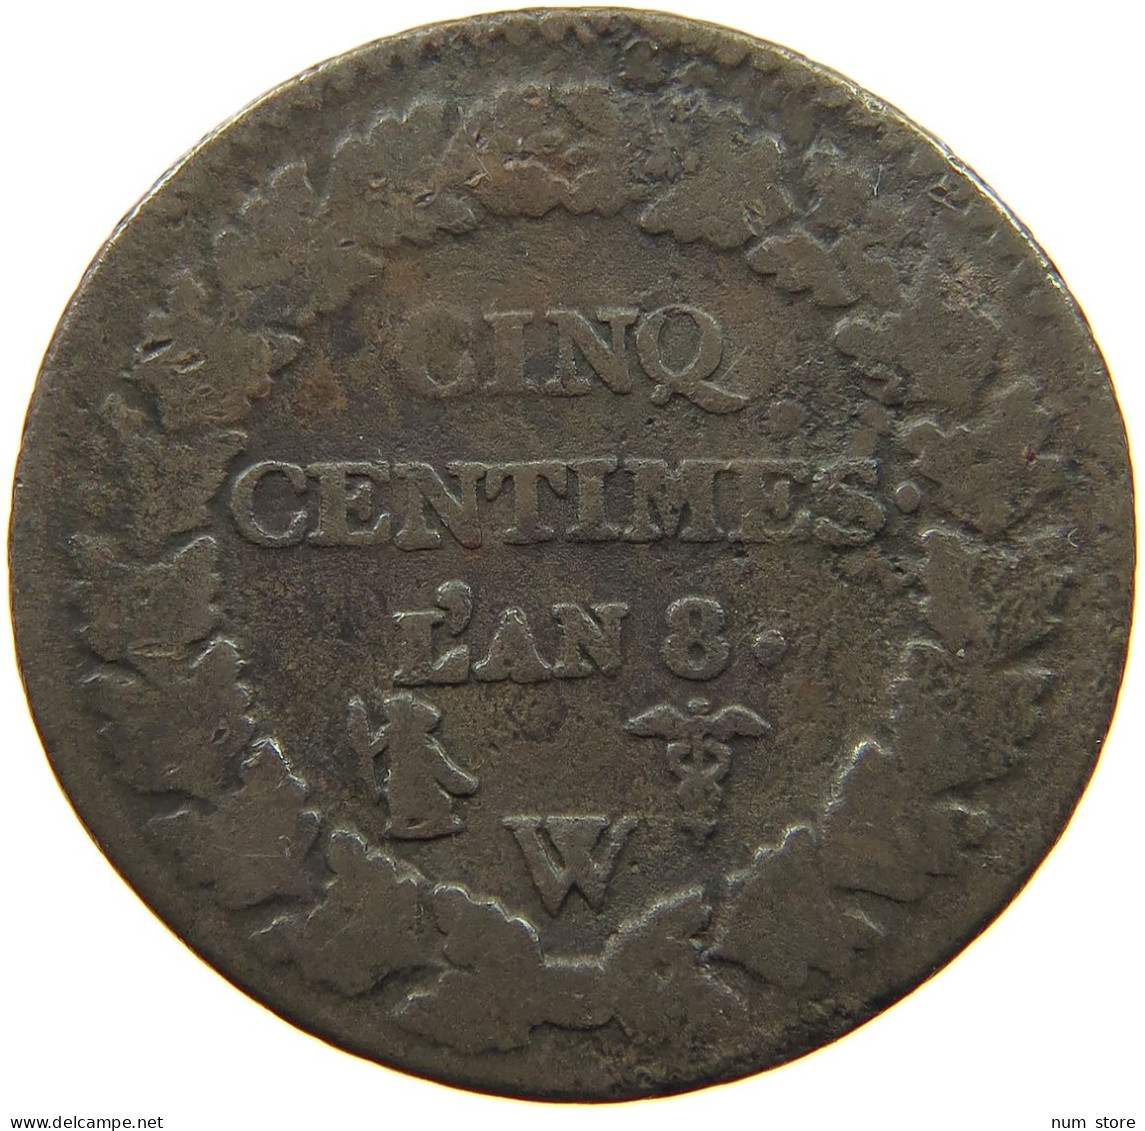 FRANCE 5 CENTIMES AN 8 W  #MA 021681 - 5 Centimes